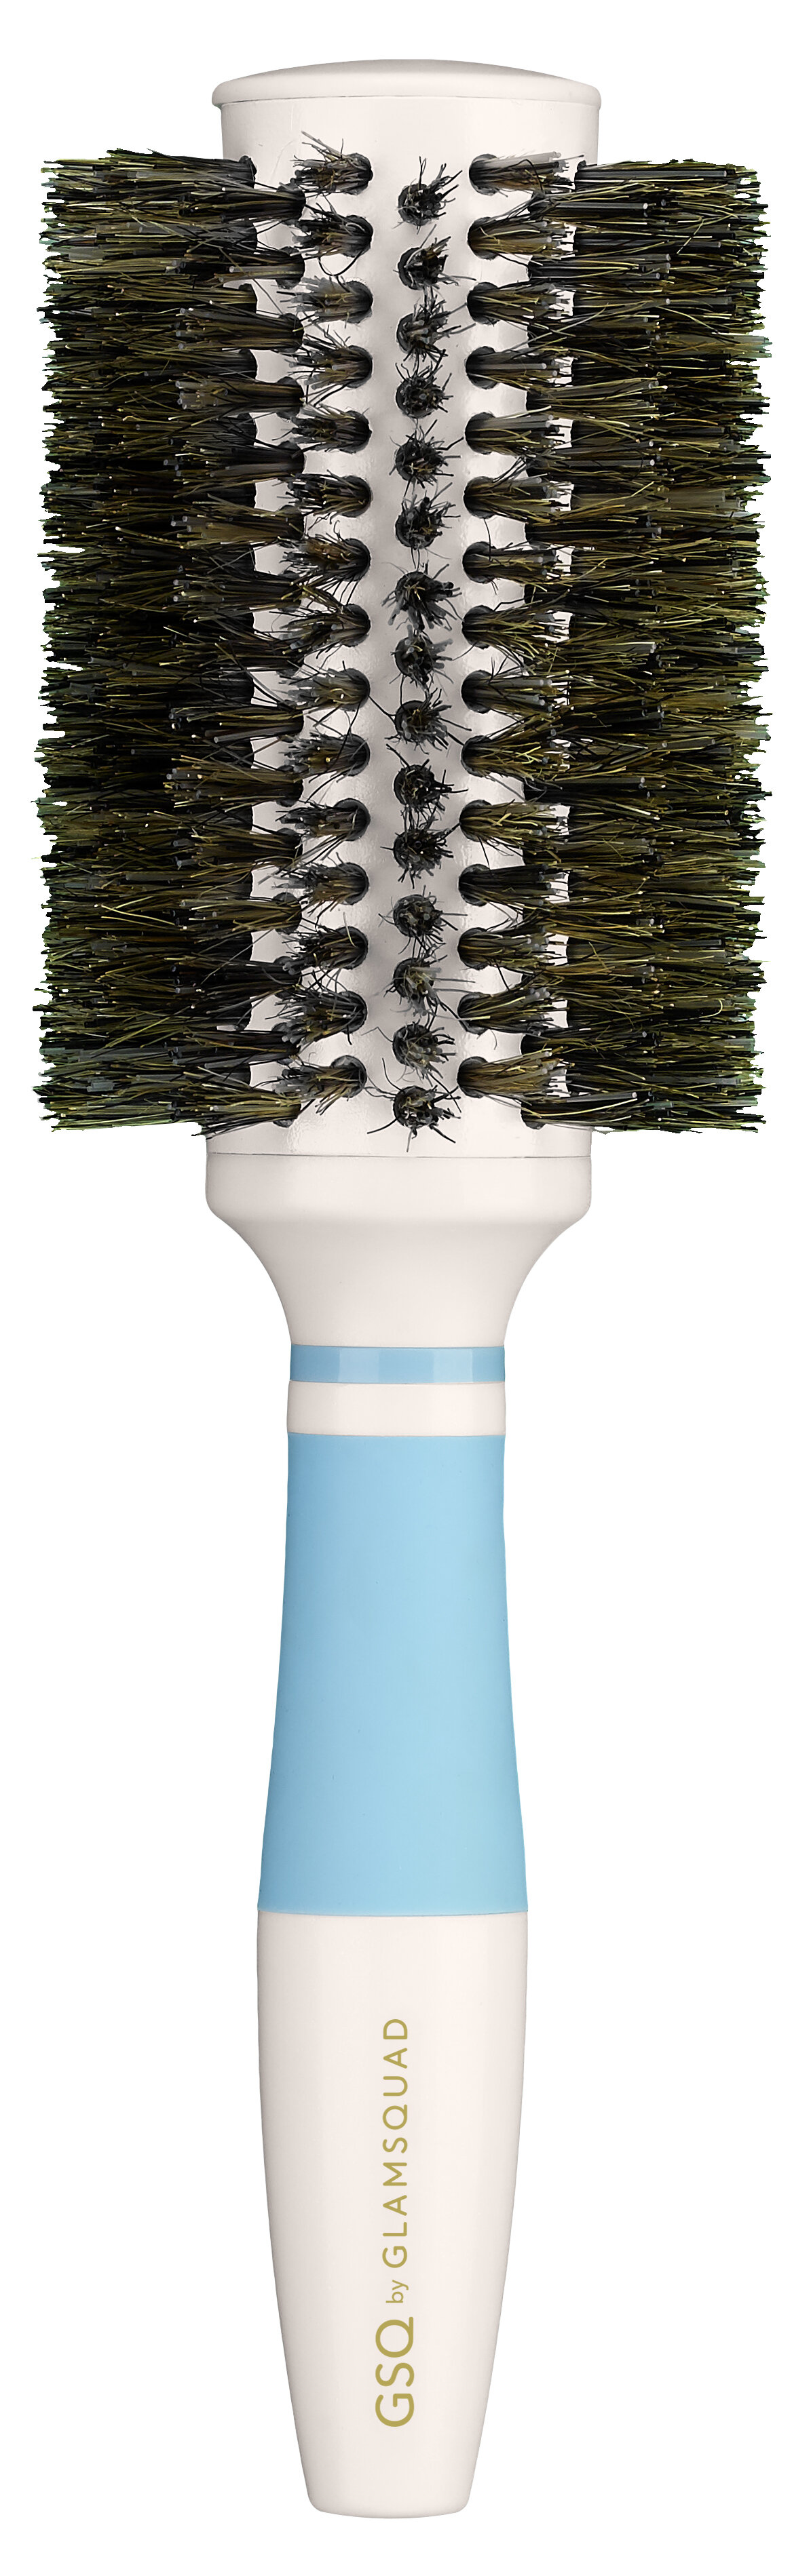 GSQ by Glamsquad - Boar Bristle Brush - Turn Up The Volume